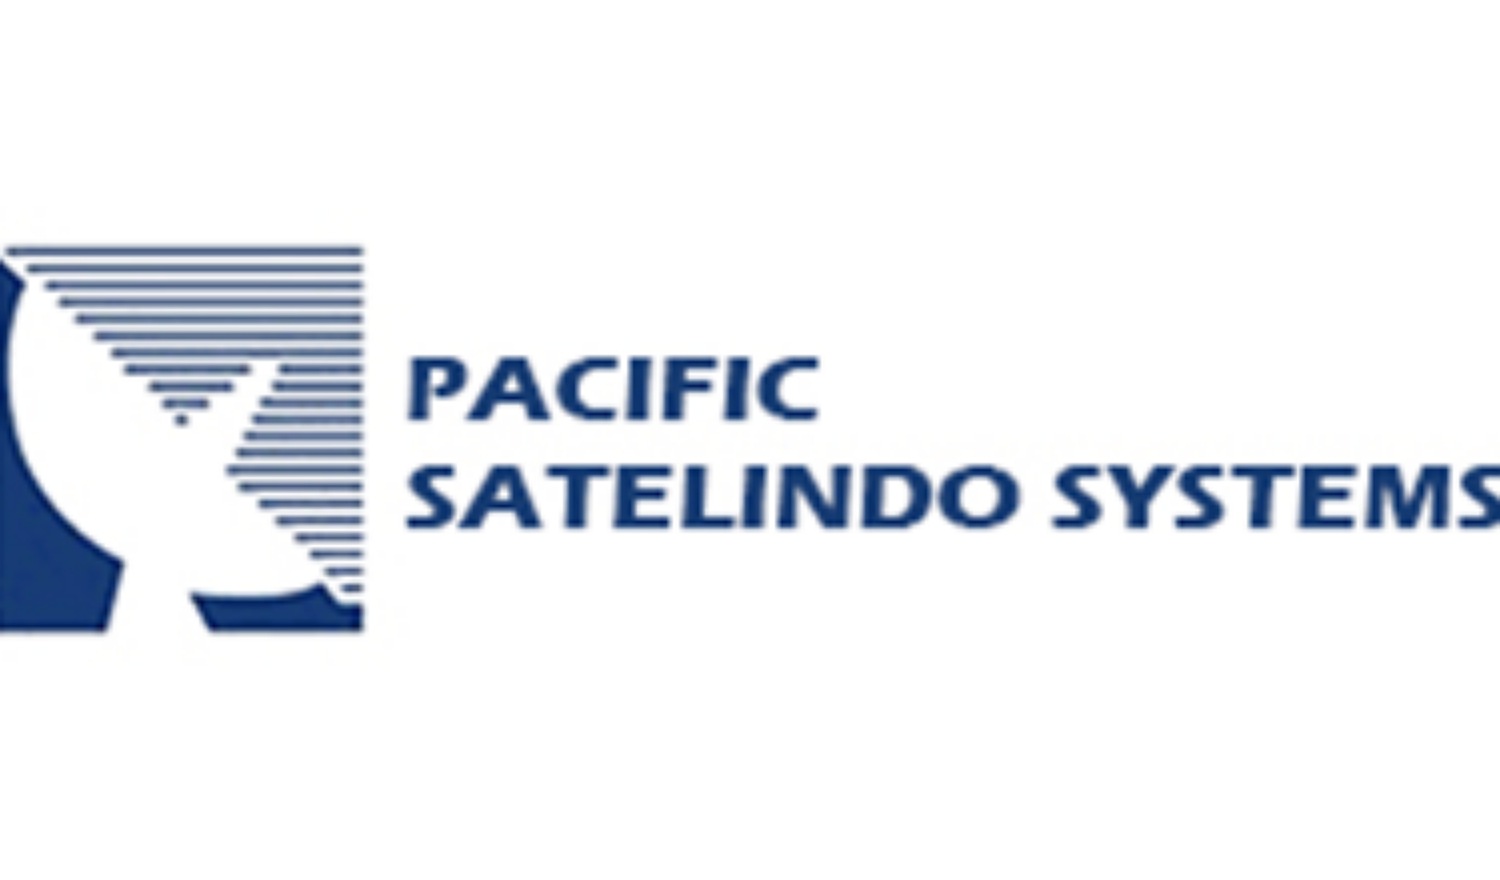 Pacific Satelindo Systema Official Store